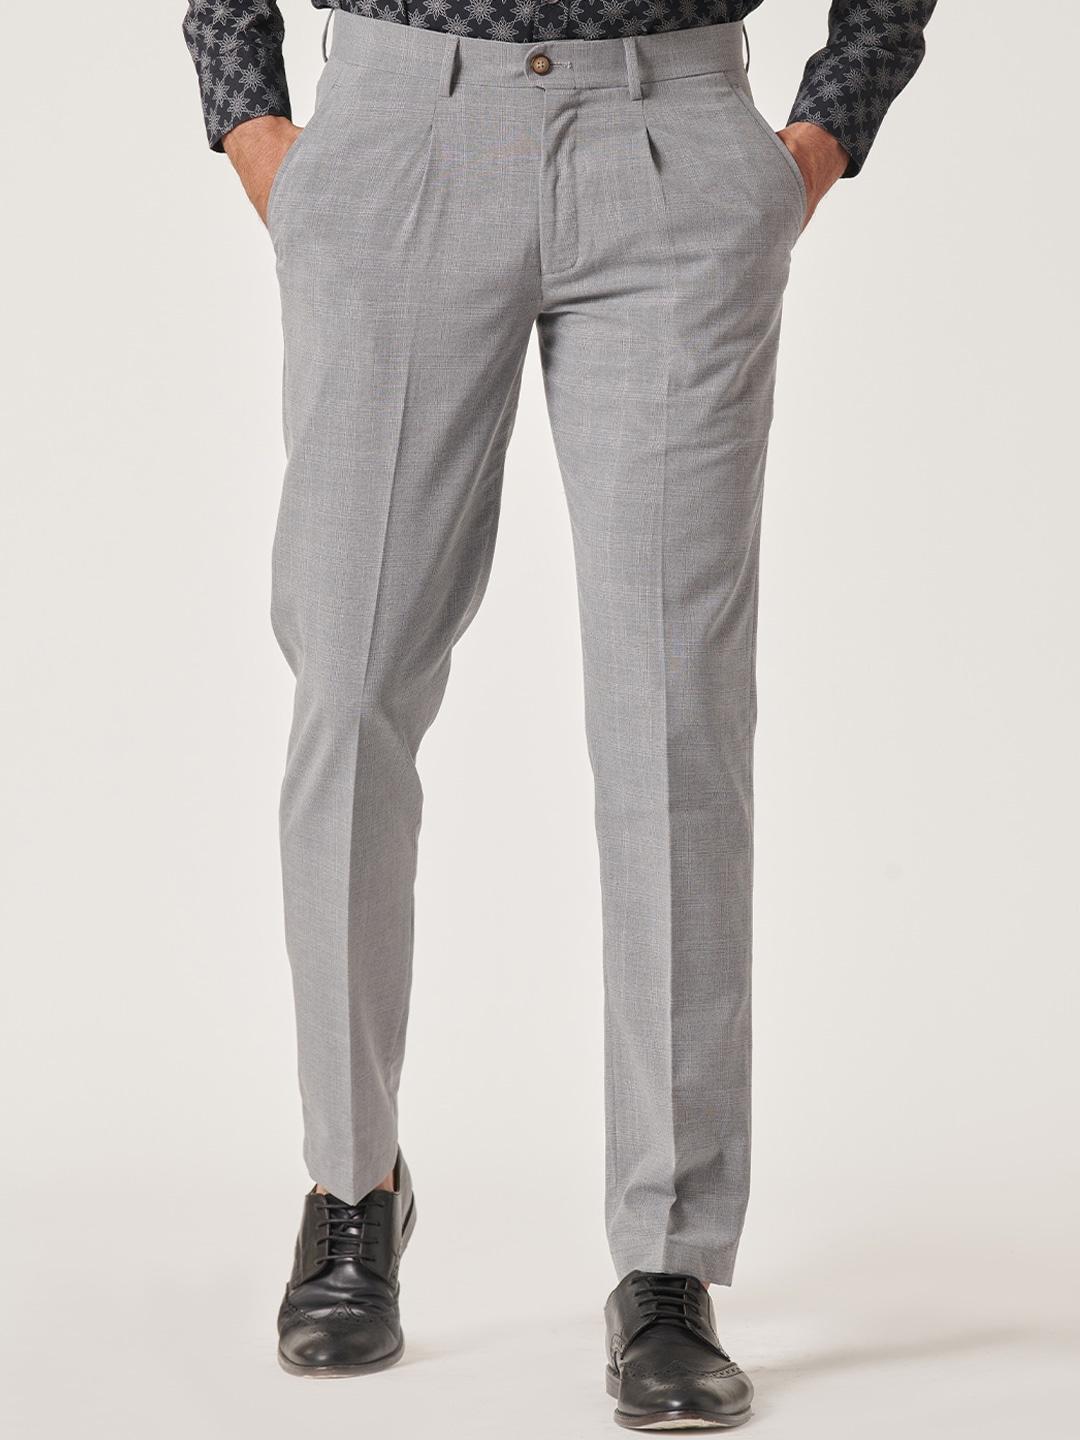 mr-button-men-checked-slim-fit-pleated-formal-trousers